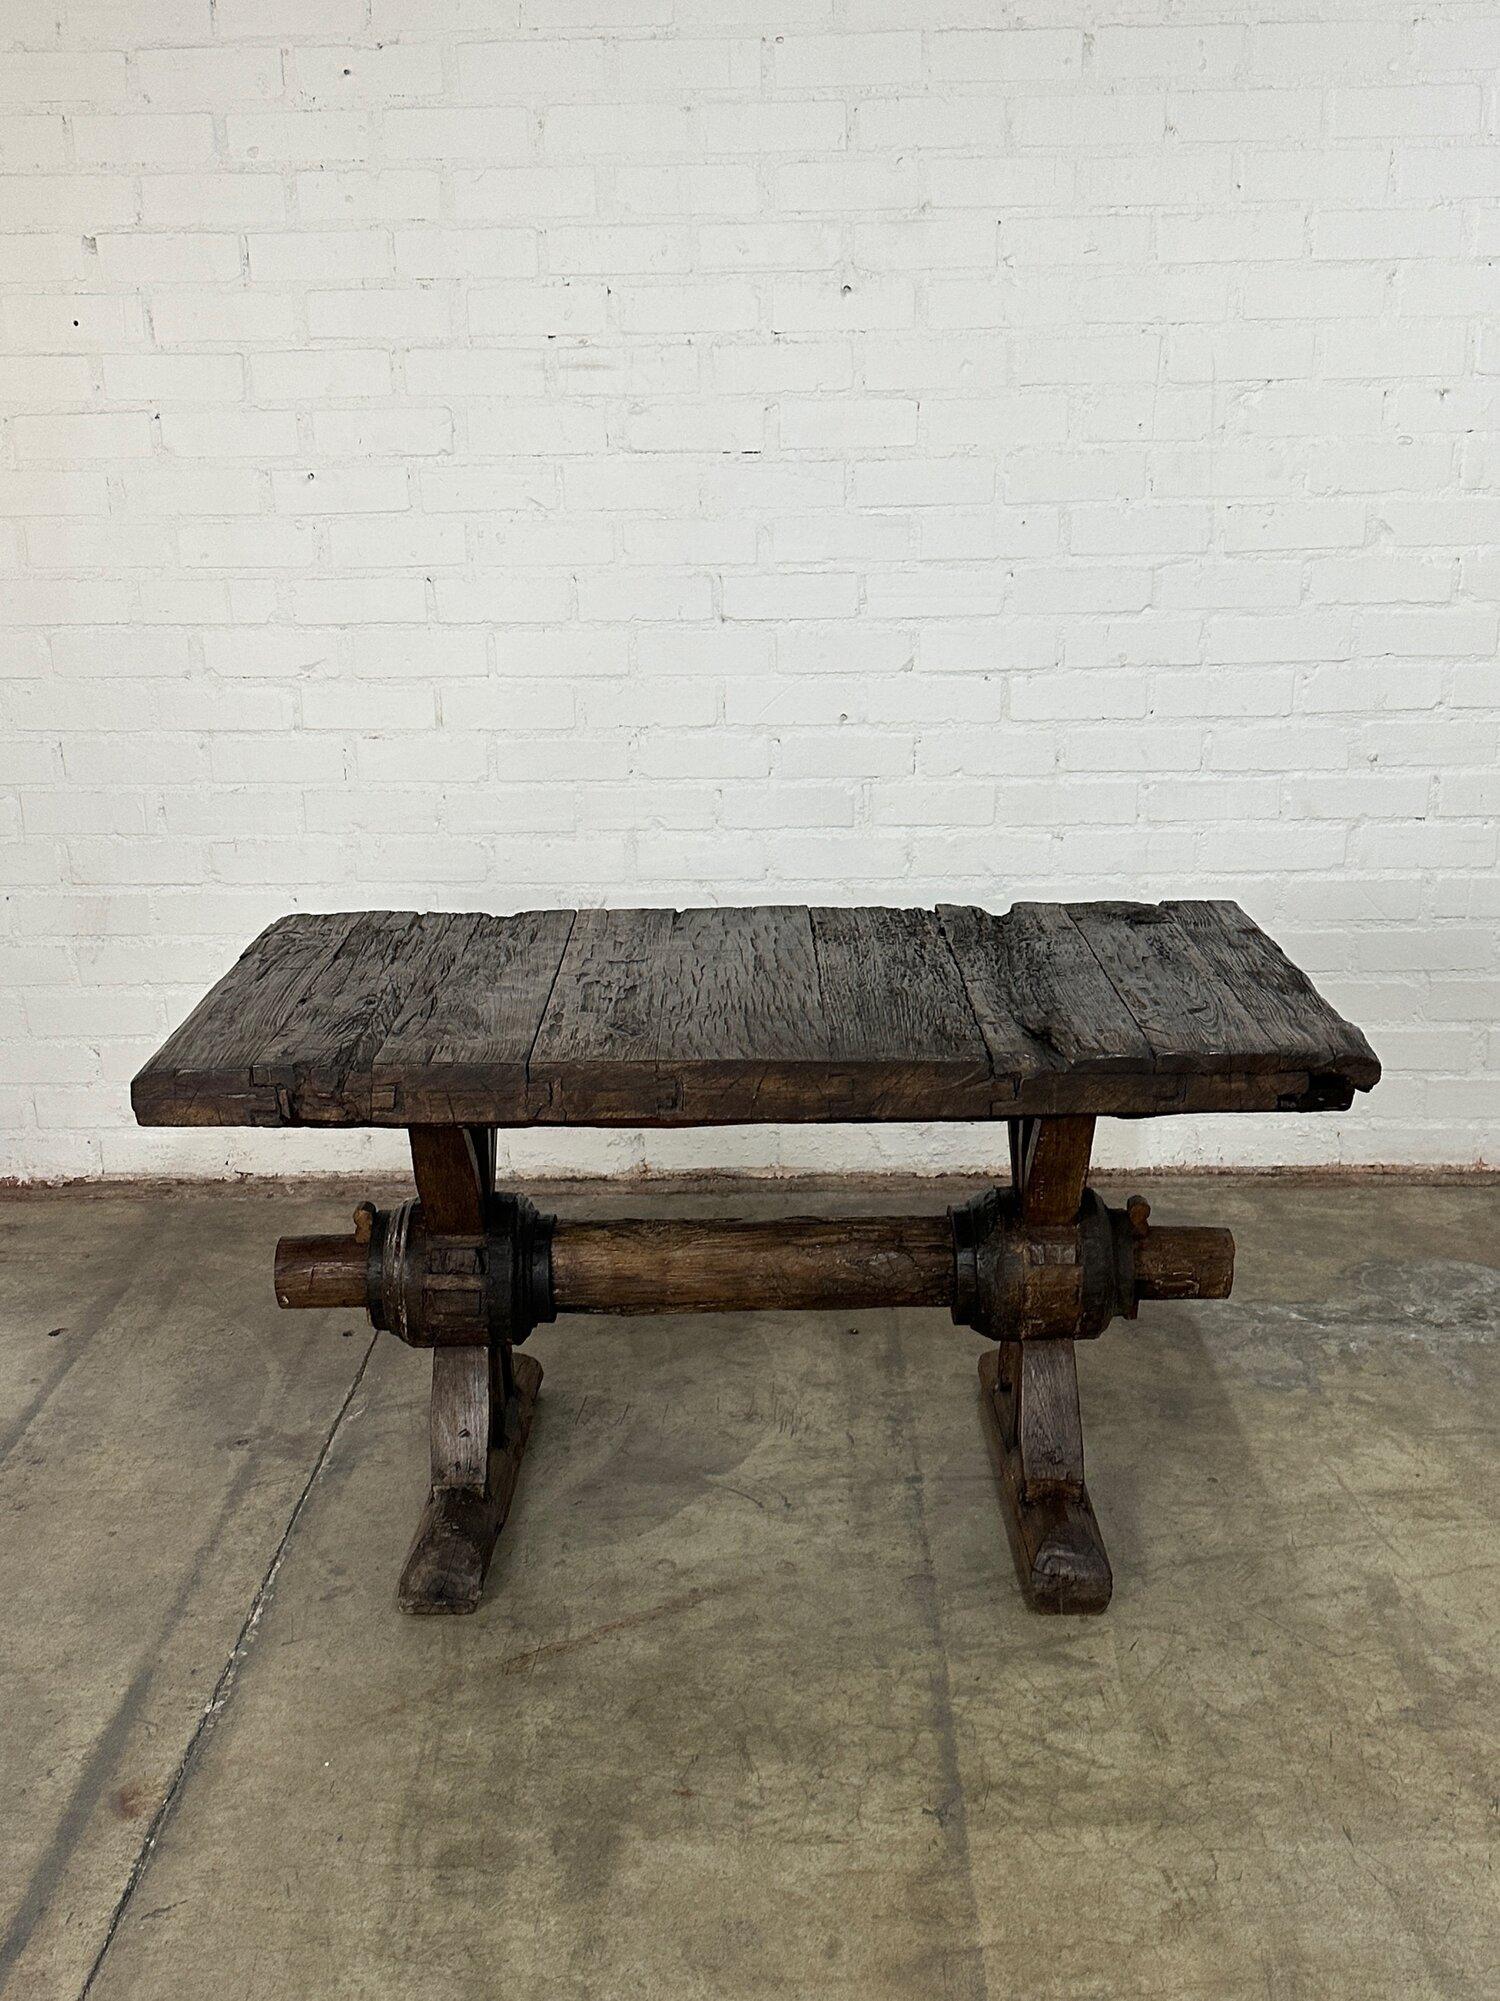 W58.5 D30 H31.5 KC28.25

Rustic Dining Table with a trestle base.  Table has a dark walnut stain and is made from solid wood, item shows natural wear consistent with the style. Base interlocks with the table top for easy disassembly. Table is